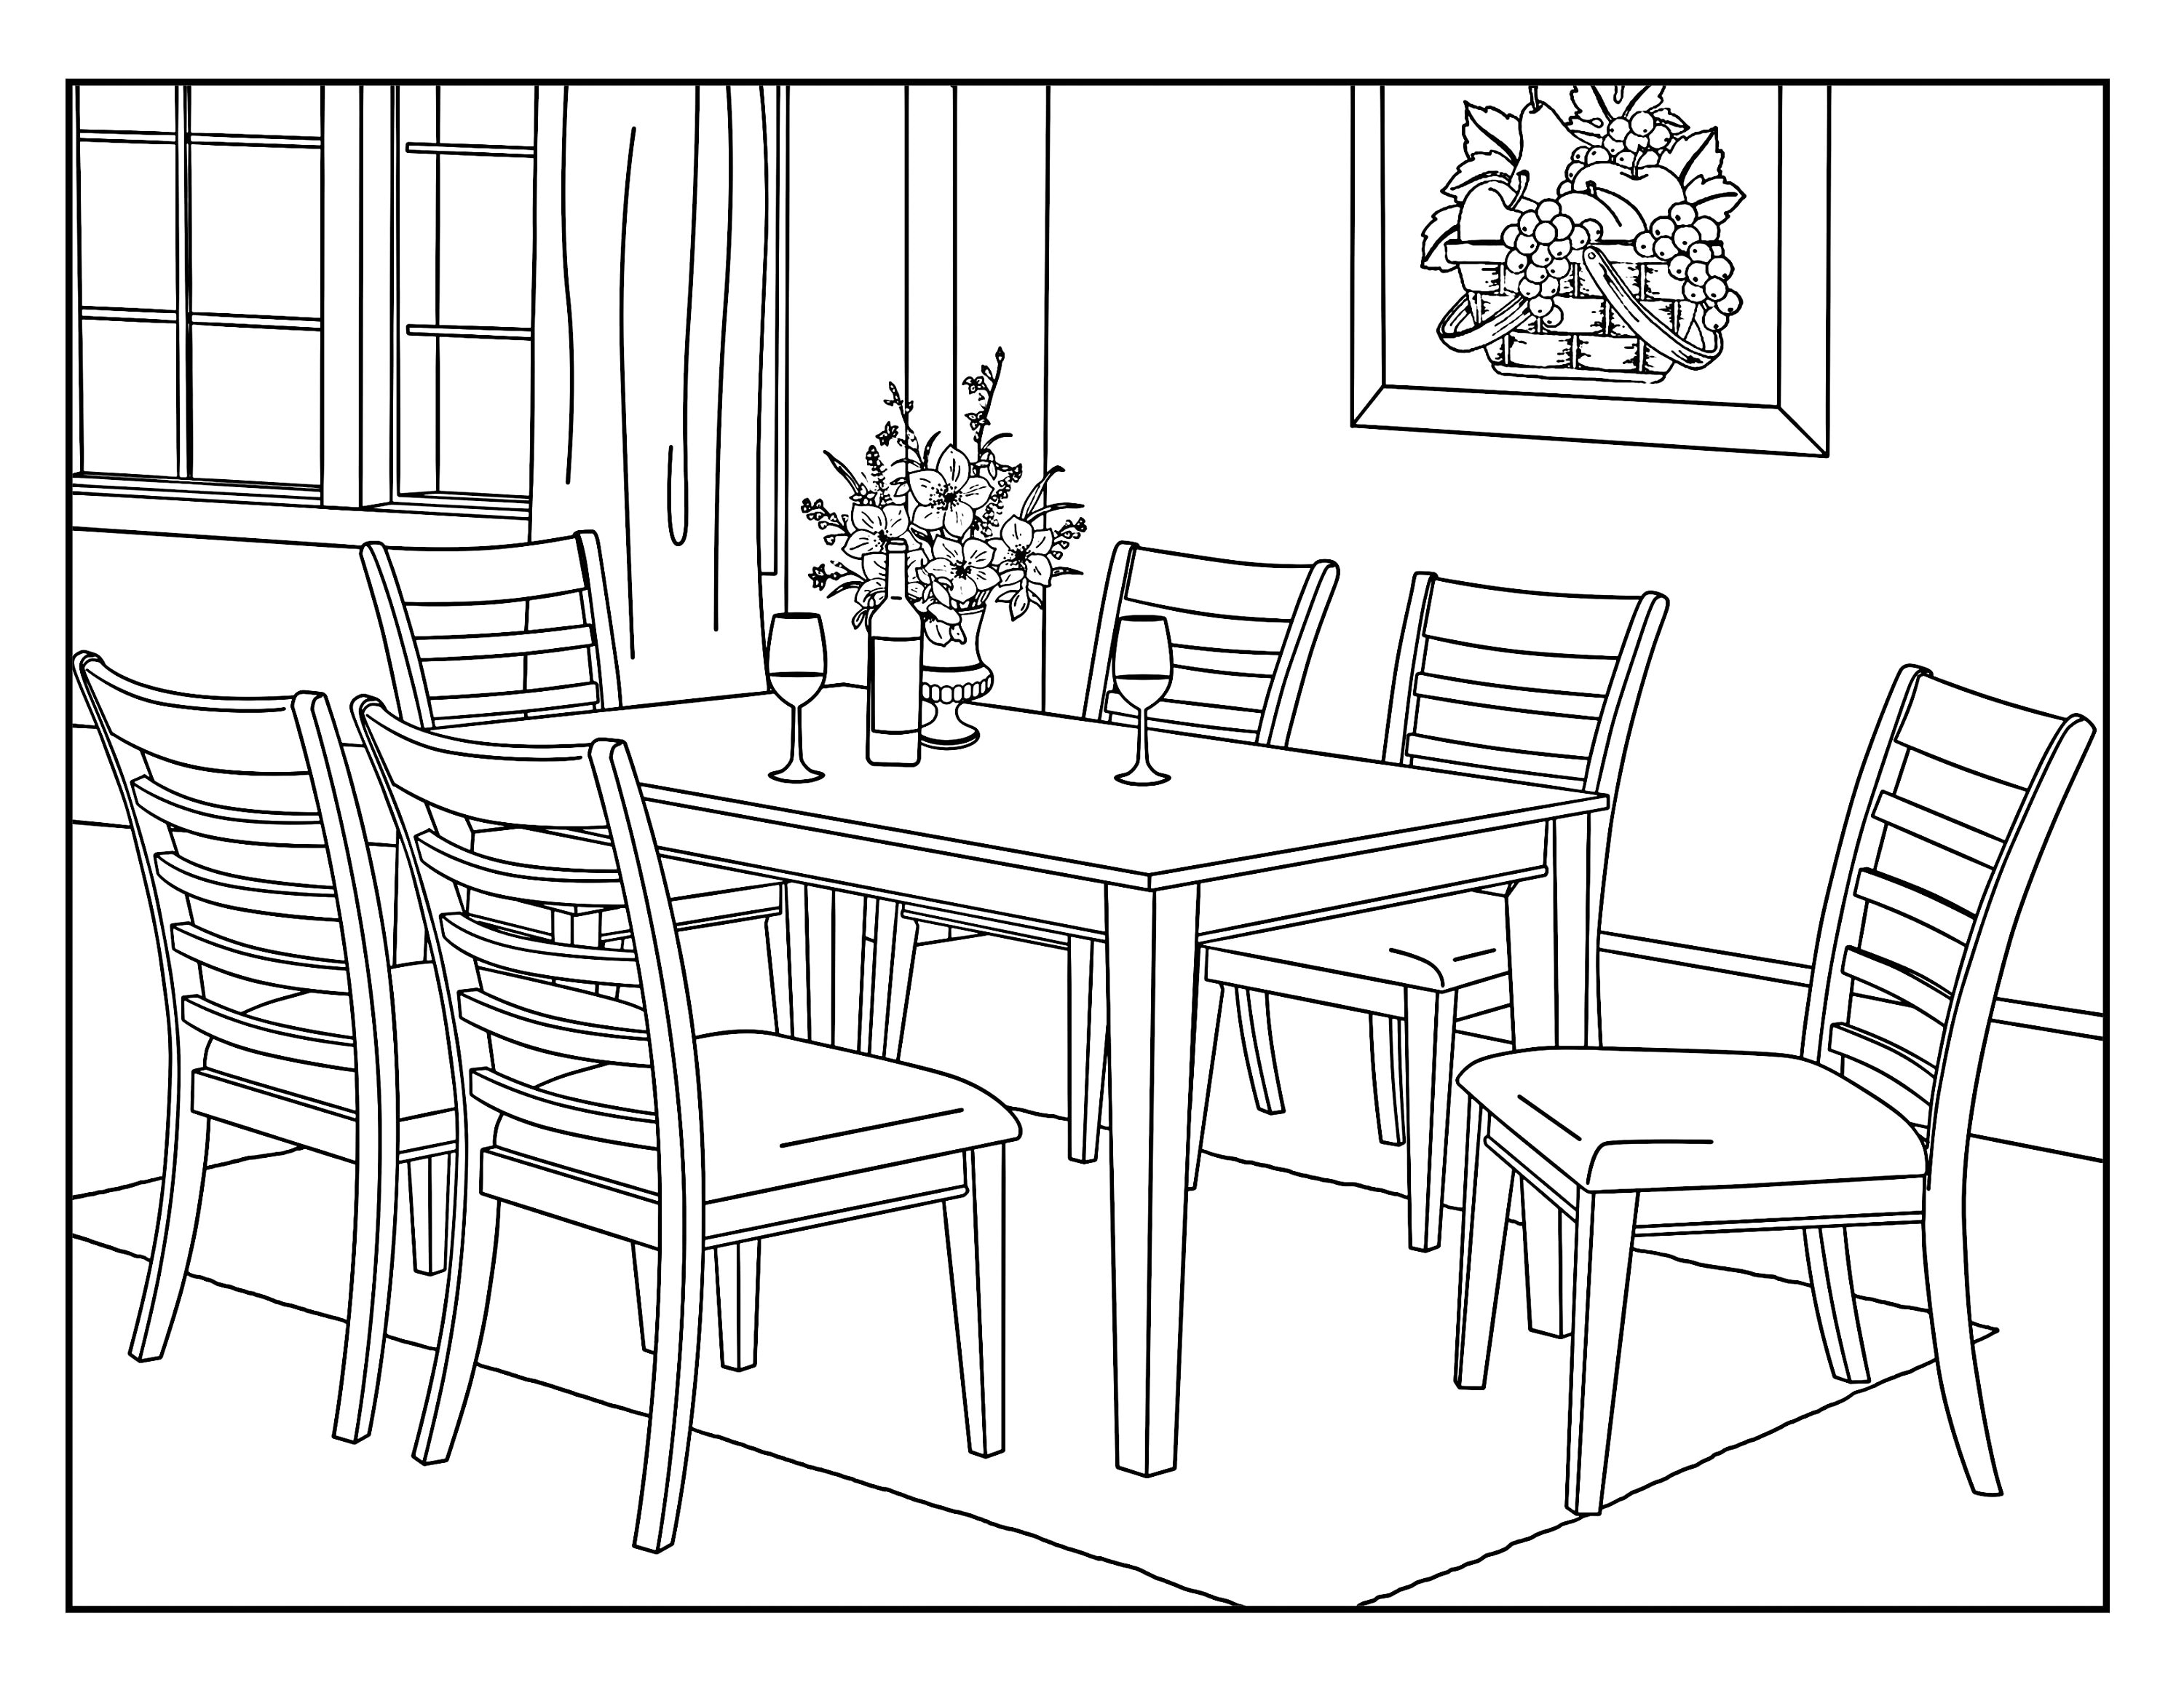 Dining room around the house coloring pages for adults printable coloring page instant download pdf